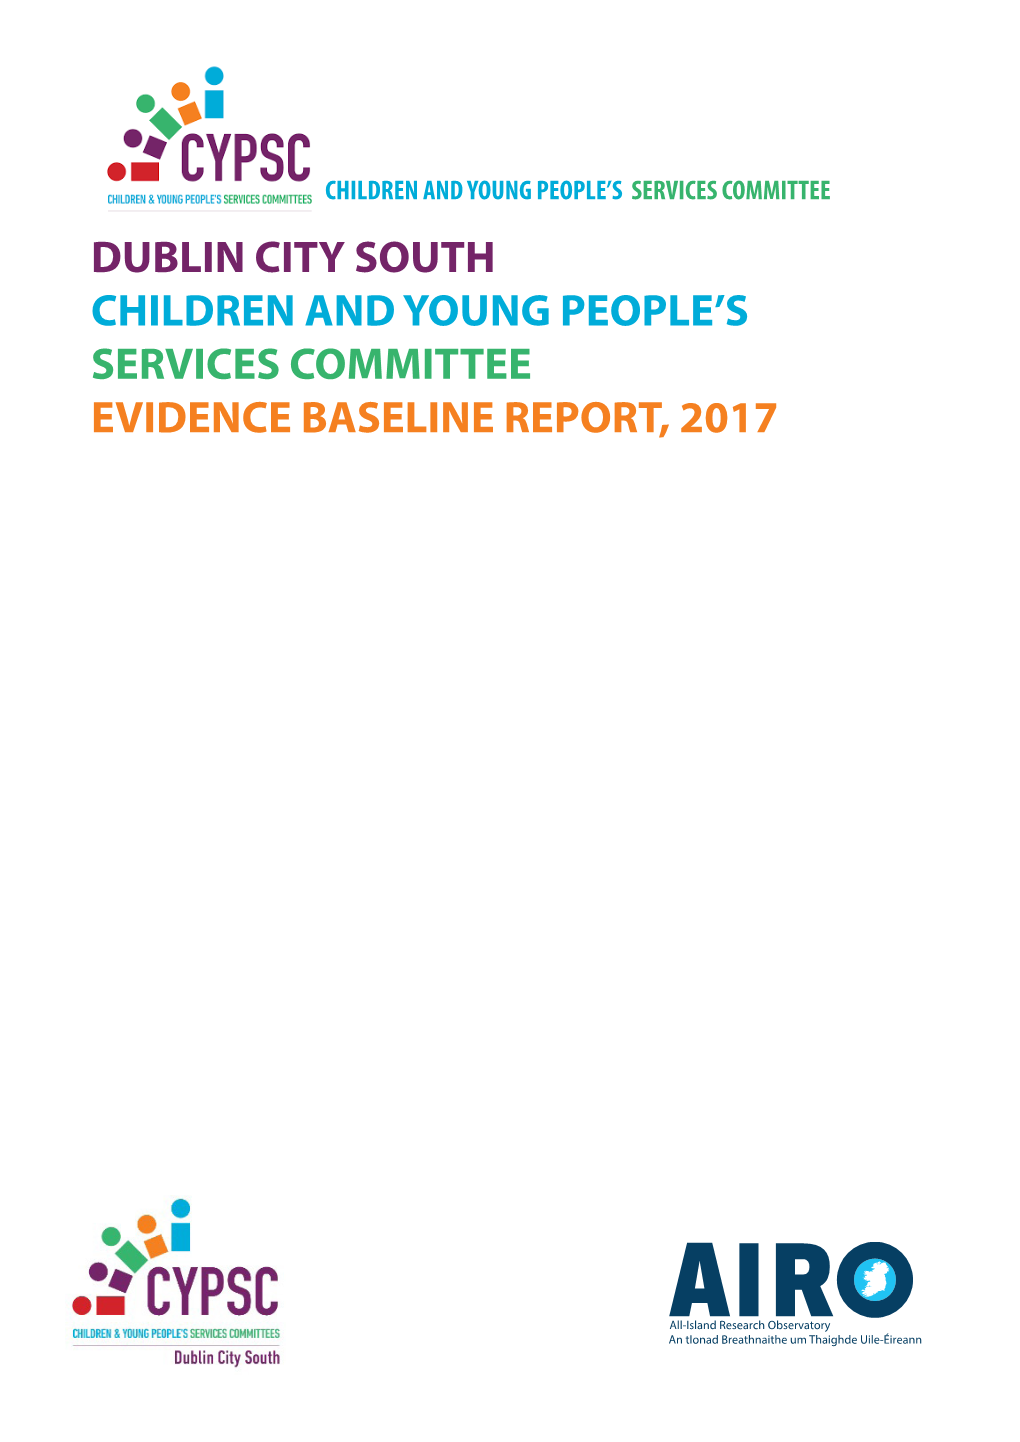 Dublin City South Children and Young People's